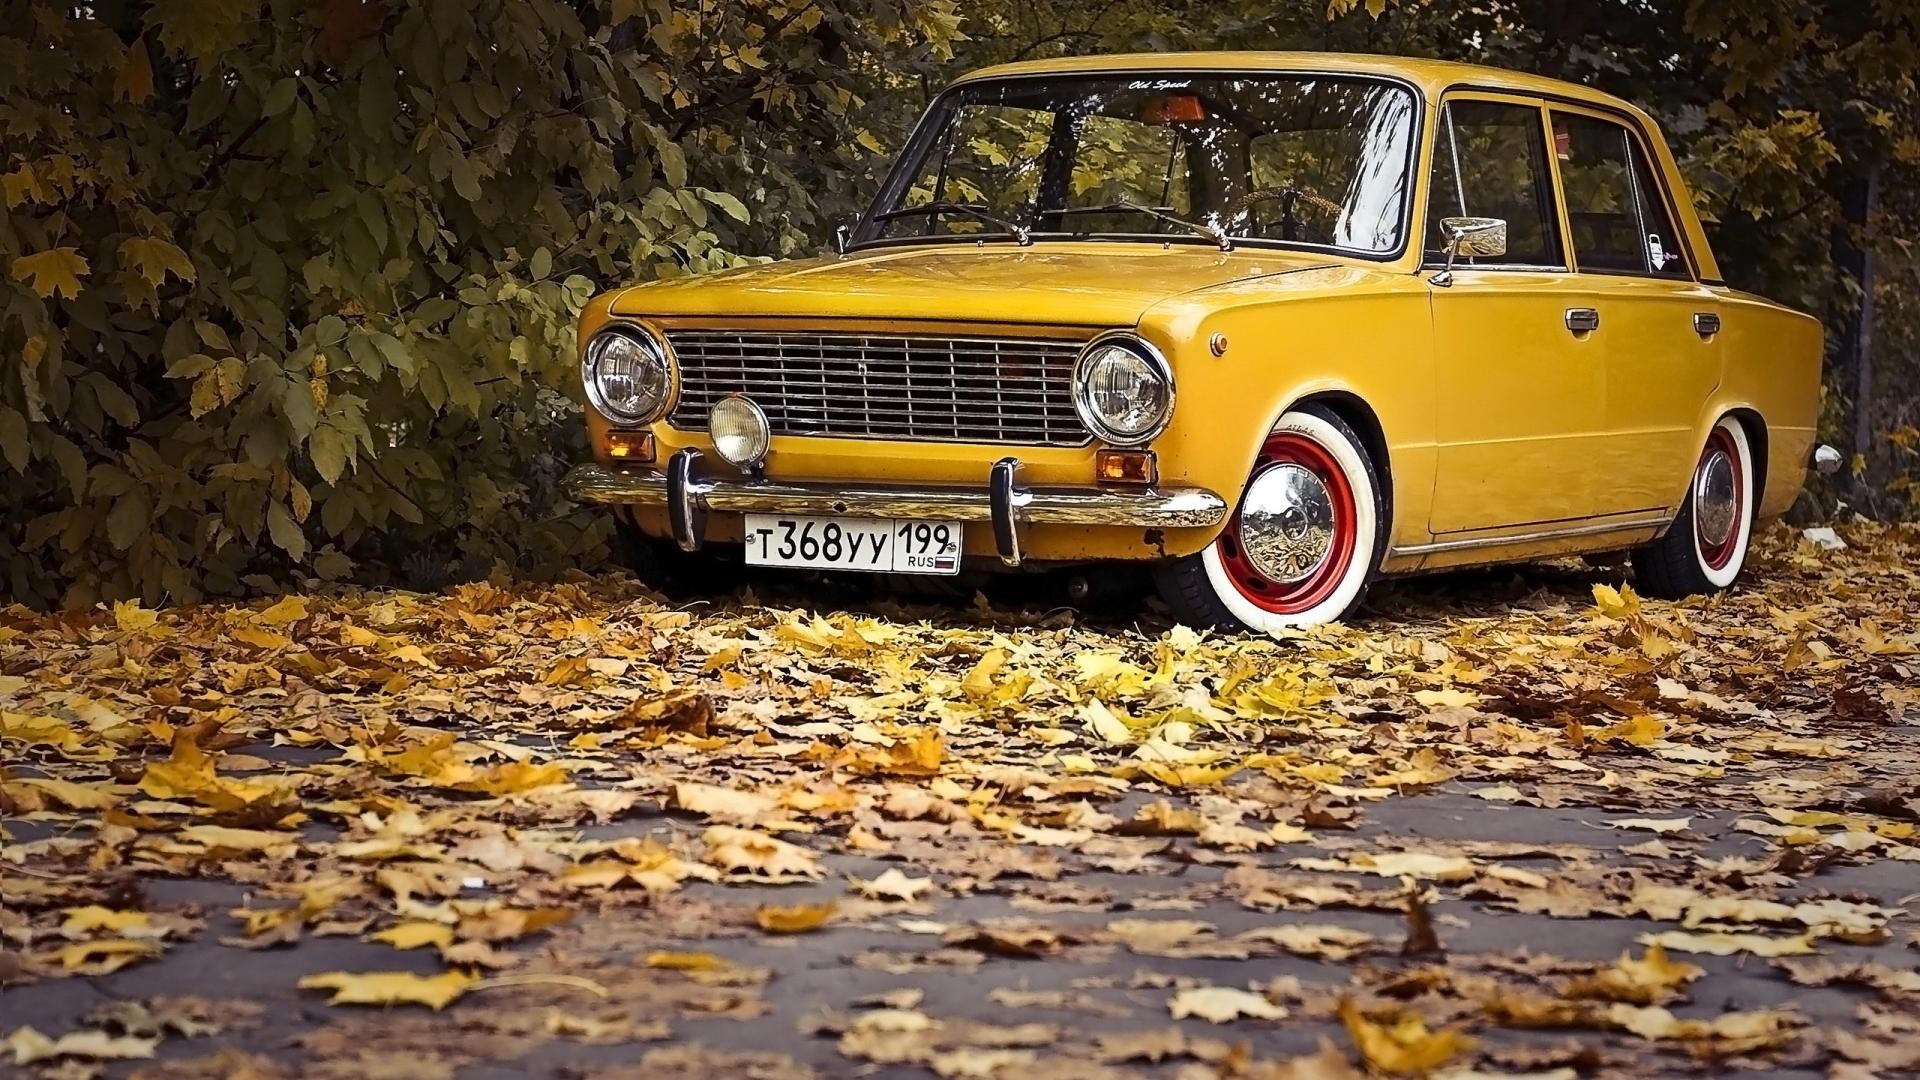 nature, Car, Trees, Fall, Vehicle, Leaves, Vintage, Russian Cars, Lada 2101, Tuning Wallpaper